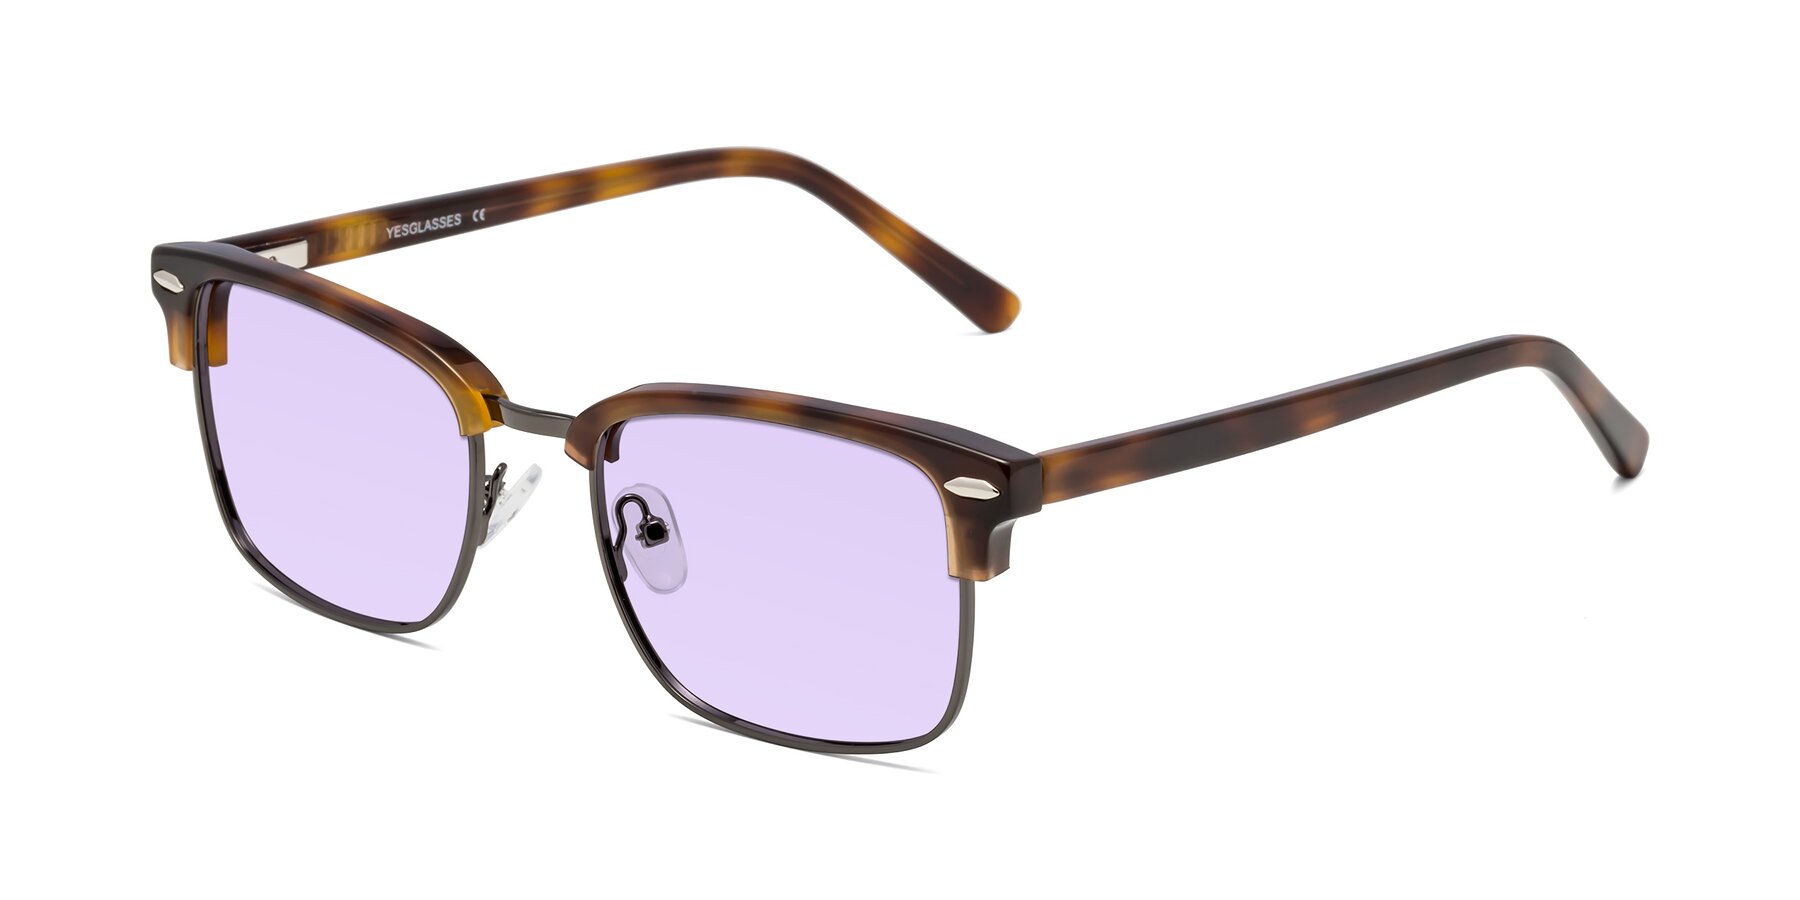 Angle of 17464 in Tortoise/ Gunmetal with Light Purple Tinted Lenses